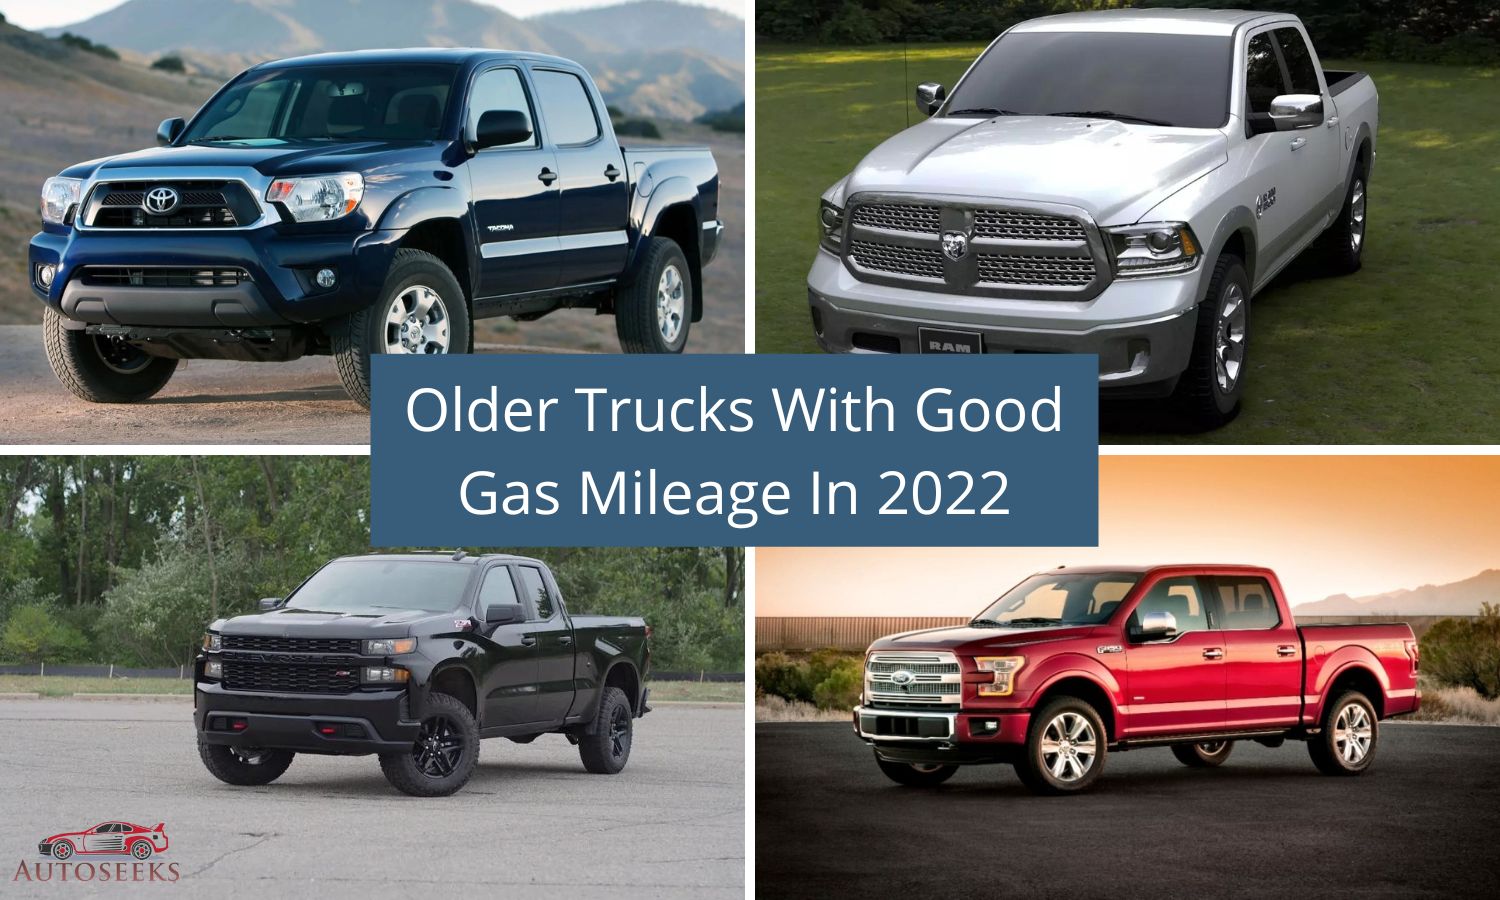 Older Trucks With Good Gas Mileage In 2022